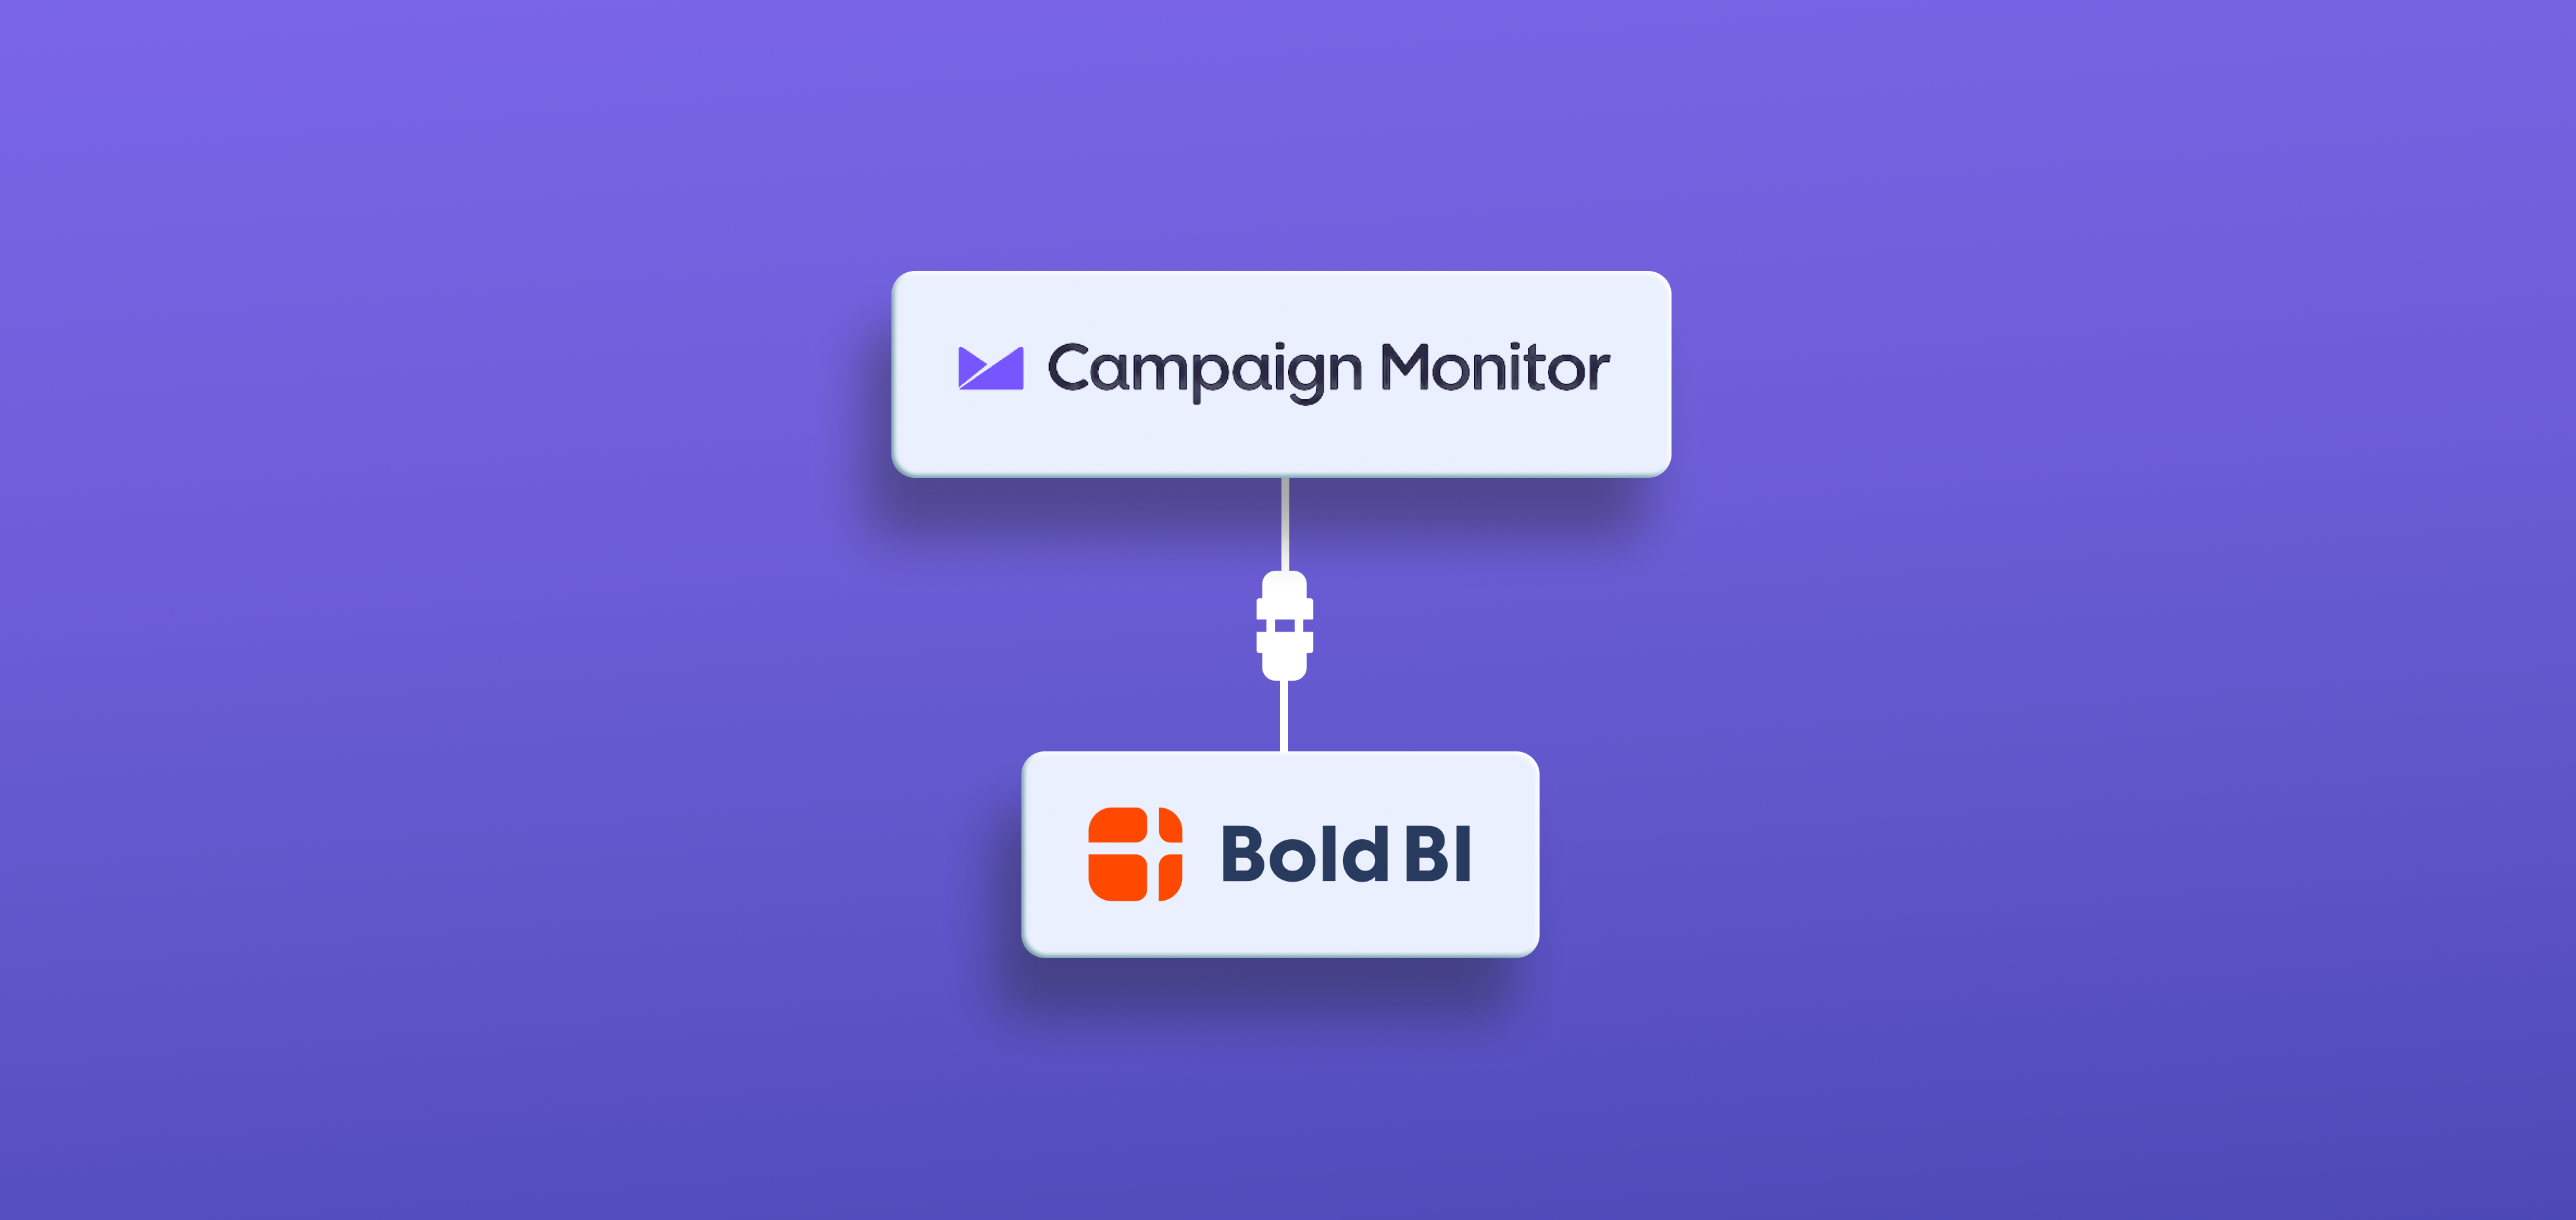 Connecting Bold BI to Campaign Monitor data source